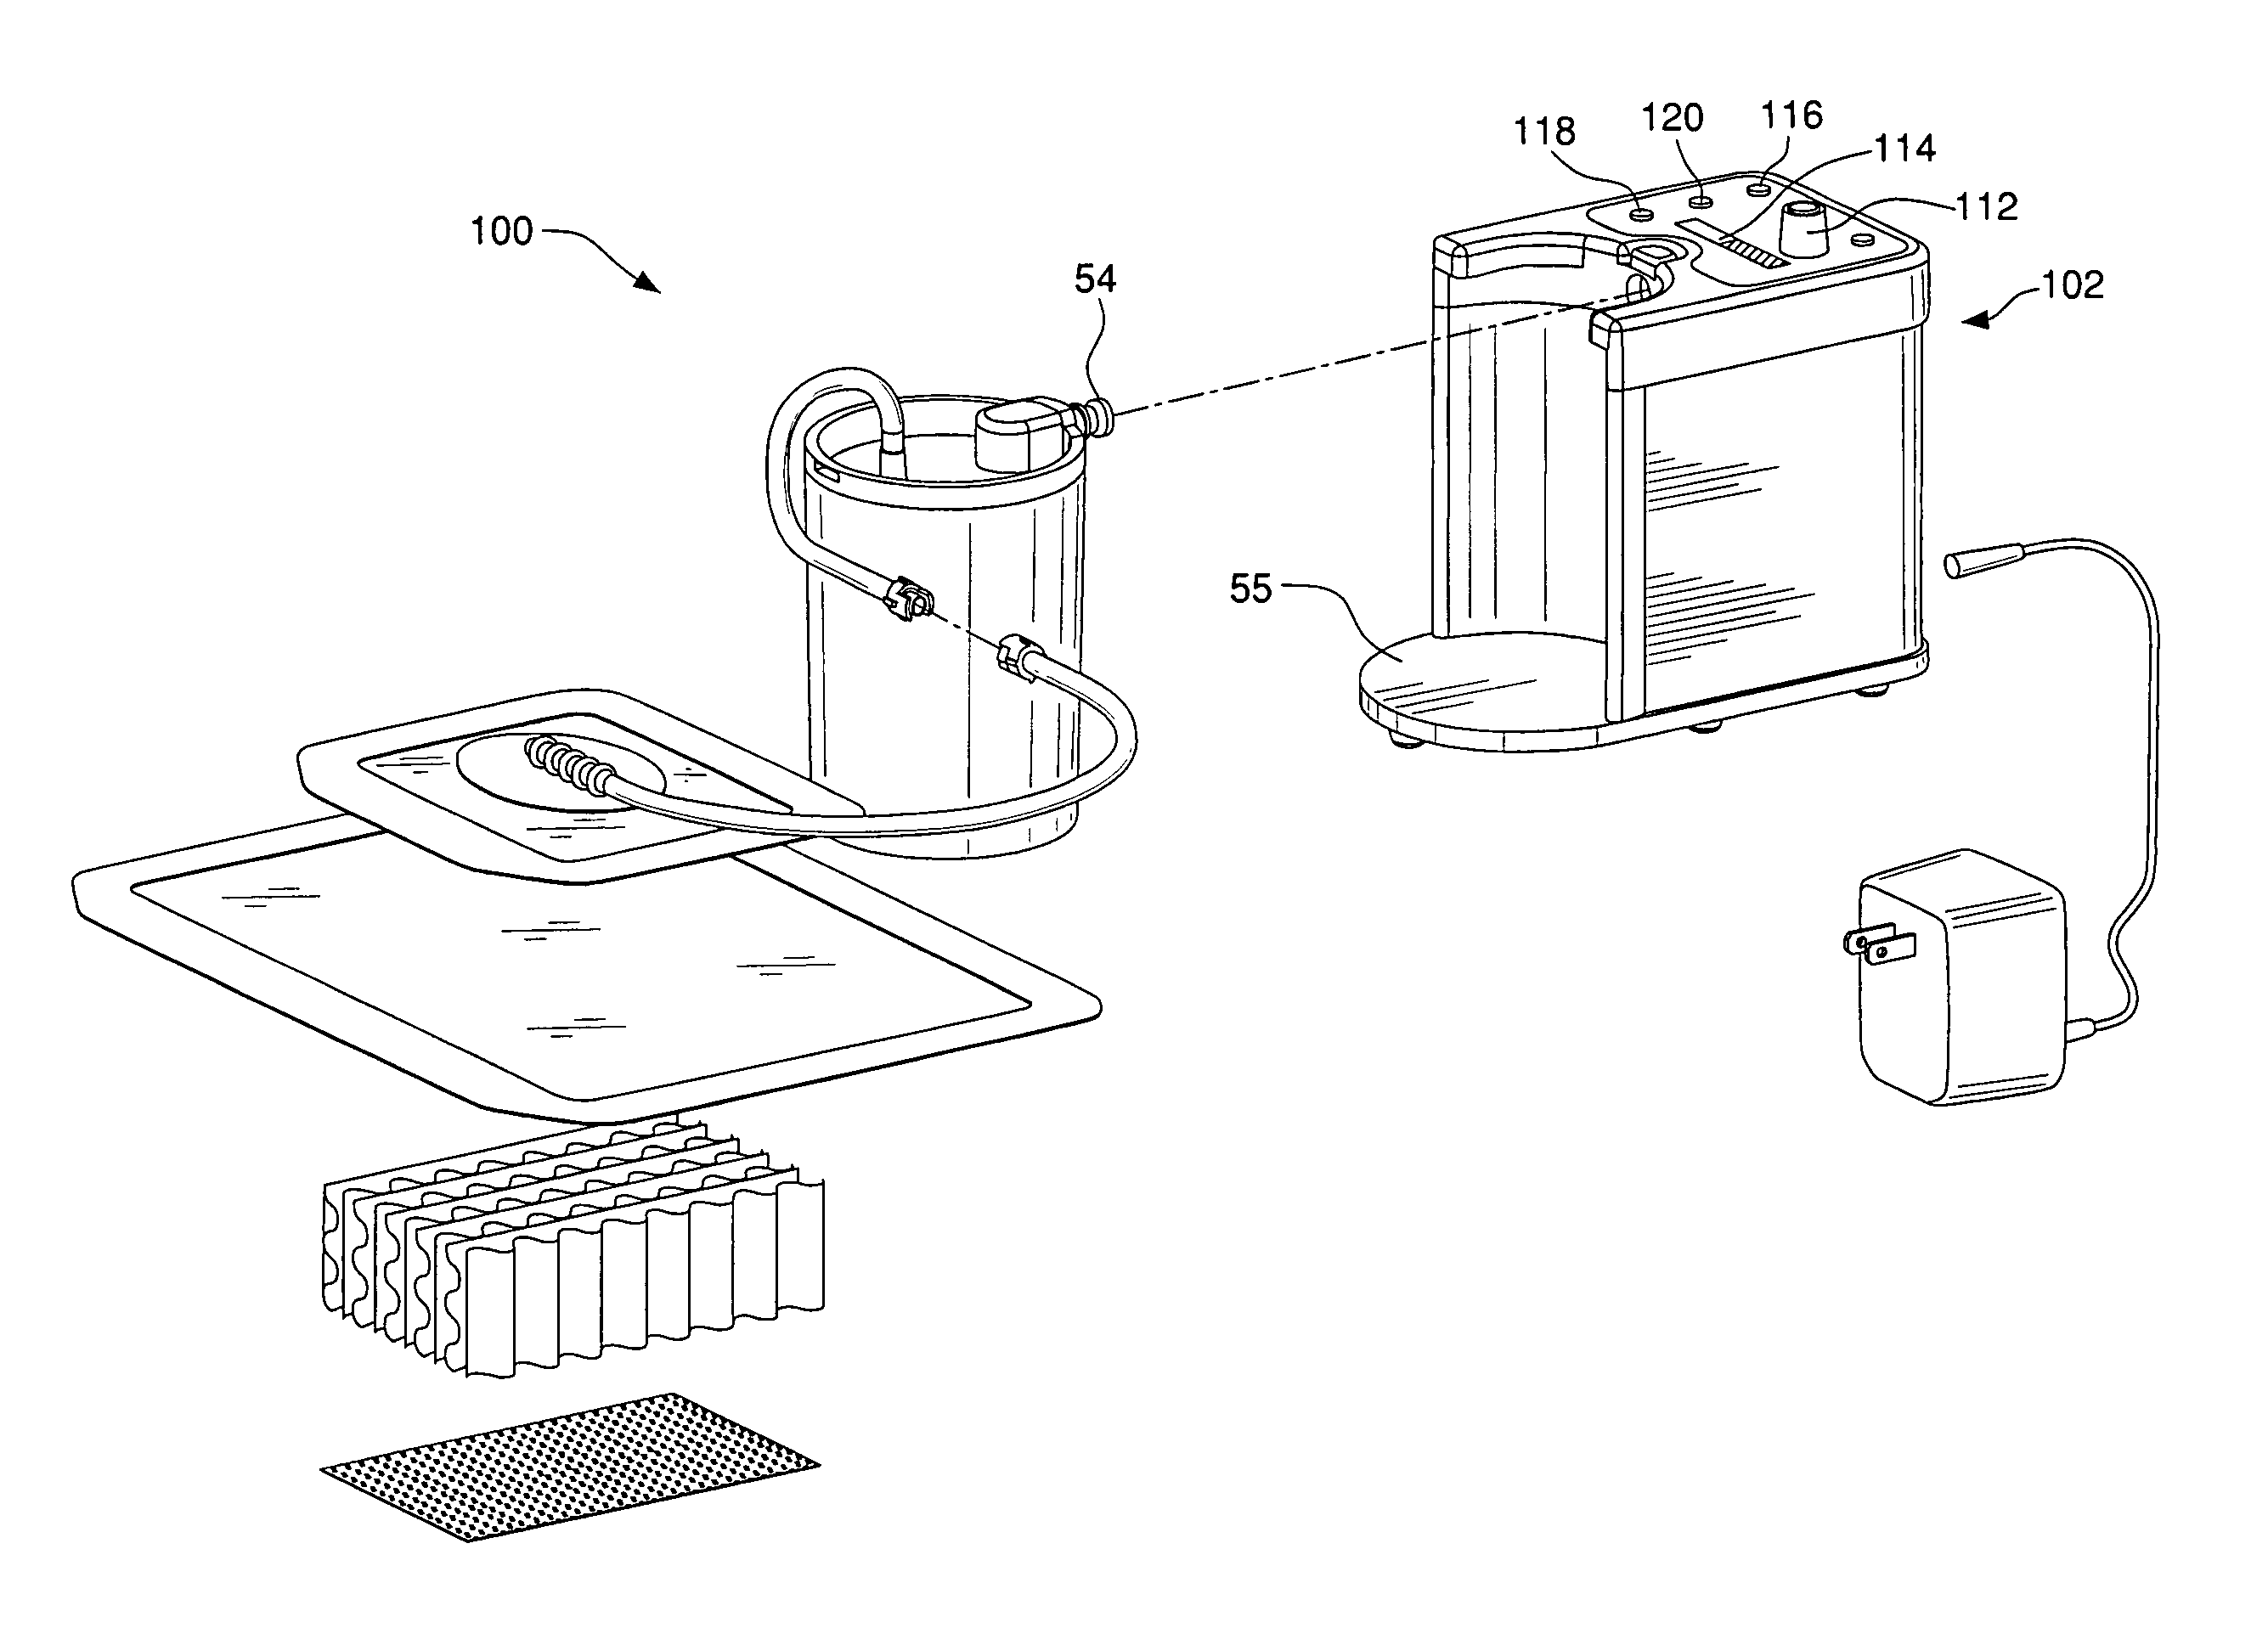 System for treating a wound with suction and method of detecting loss of suction